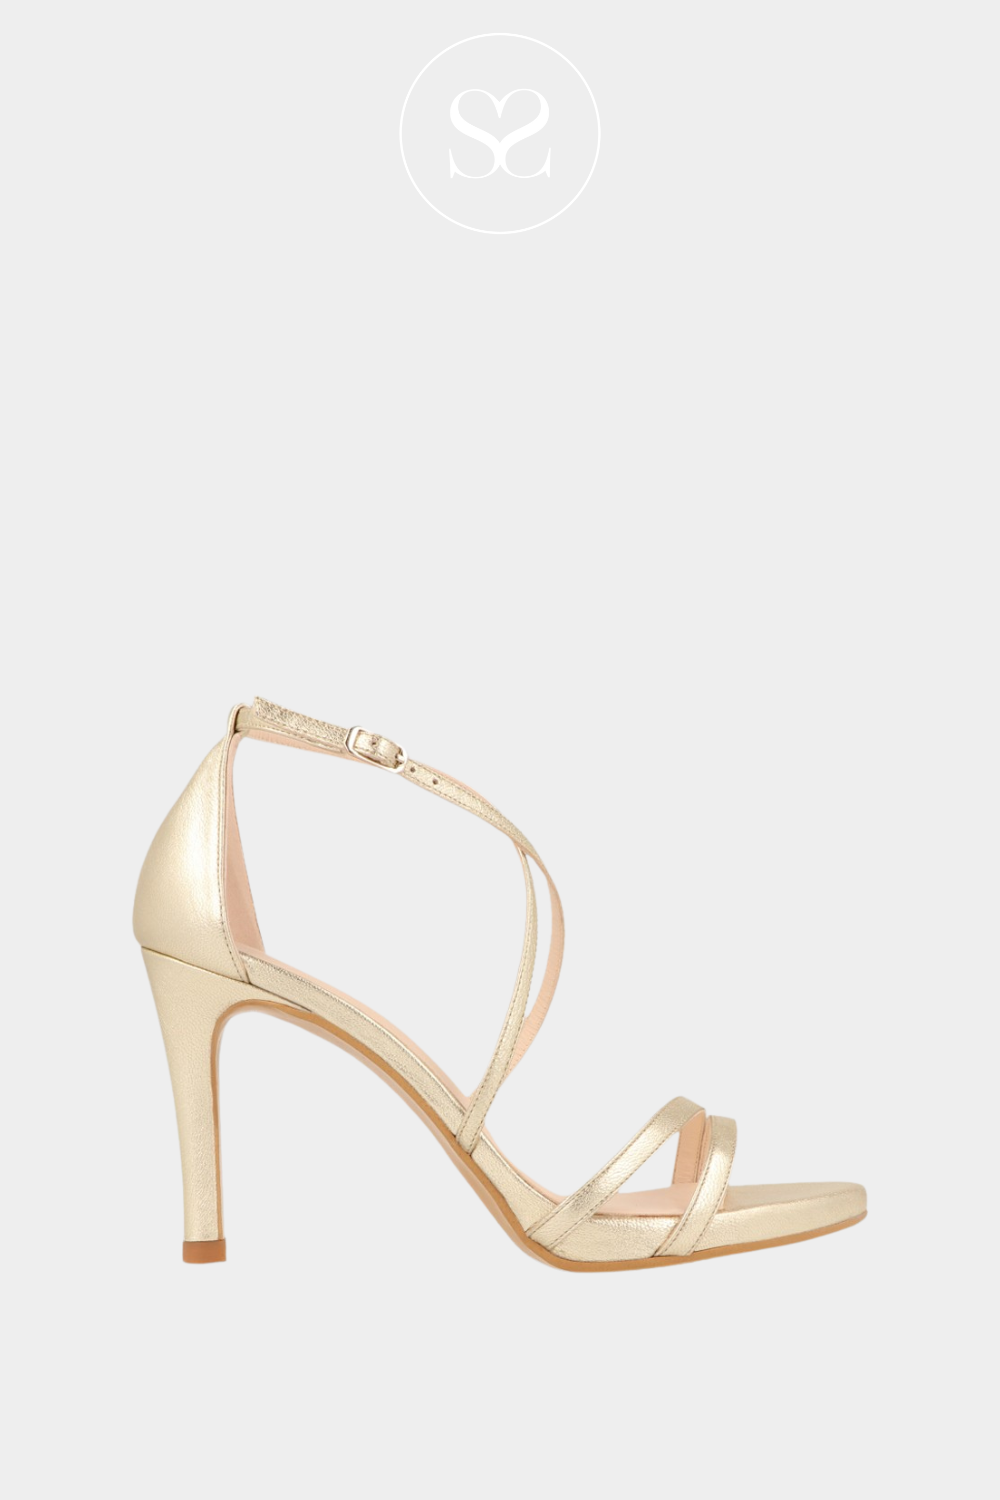 Shop Stuart Weitzman Barely There Patent-Leather Strappy Sandals | Saks  Fifth Avenue